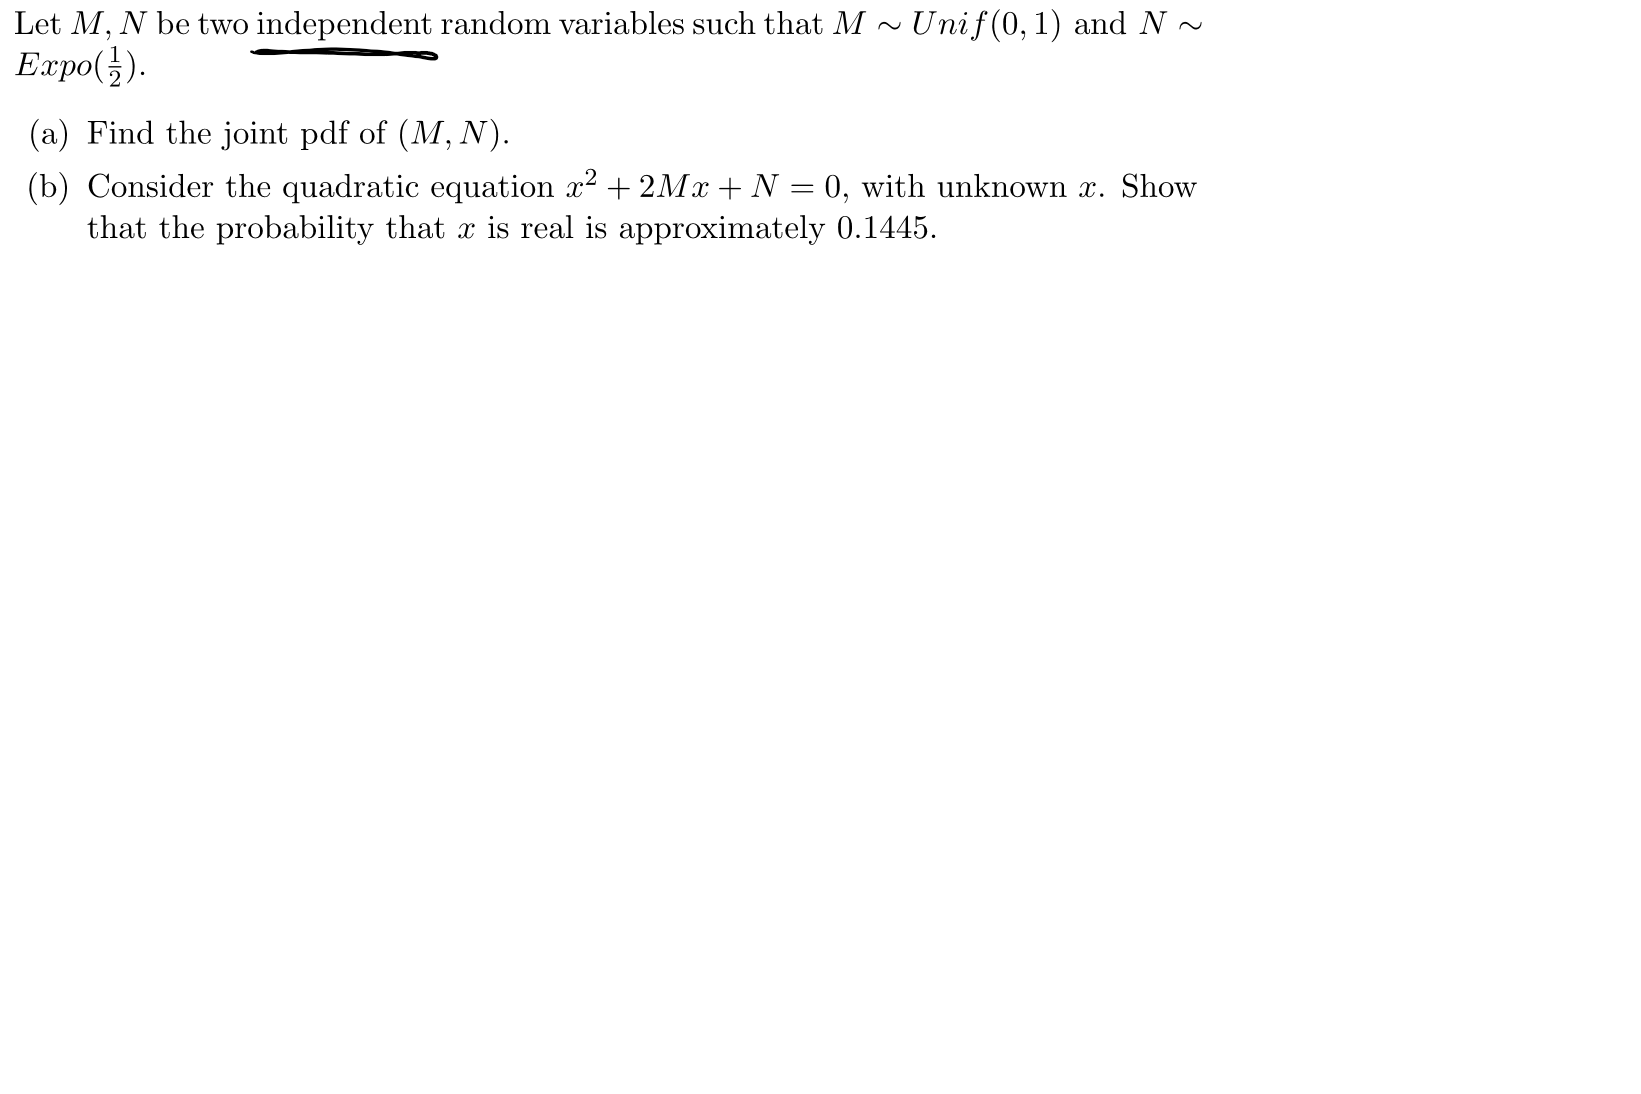 Let M, N be two independent random variables such that M~Unif(0,1) and N~
Expo()
(a) Find the joint pdf of (M, N).
(b) Consider the quadratic equation 2 2MzN0, with unknown z. Show
that the probability that x is real is approximately 0.1445
